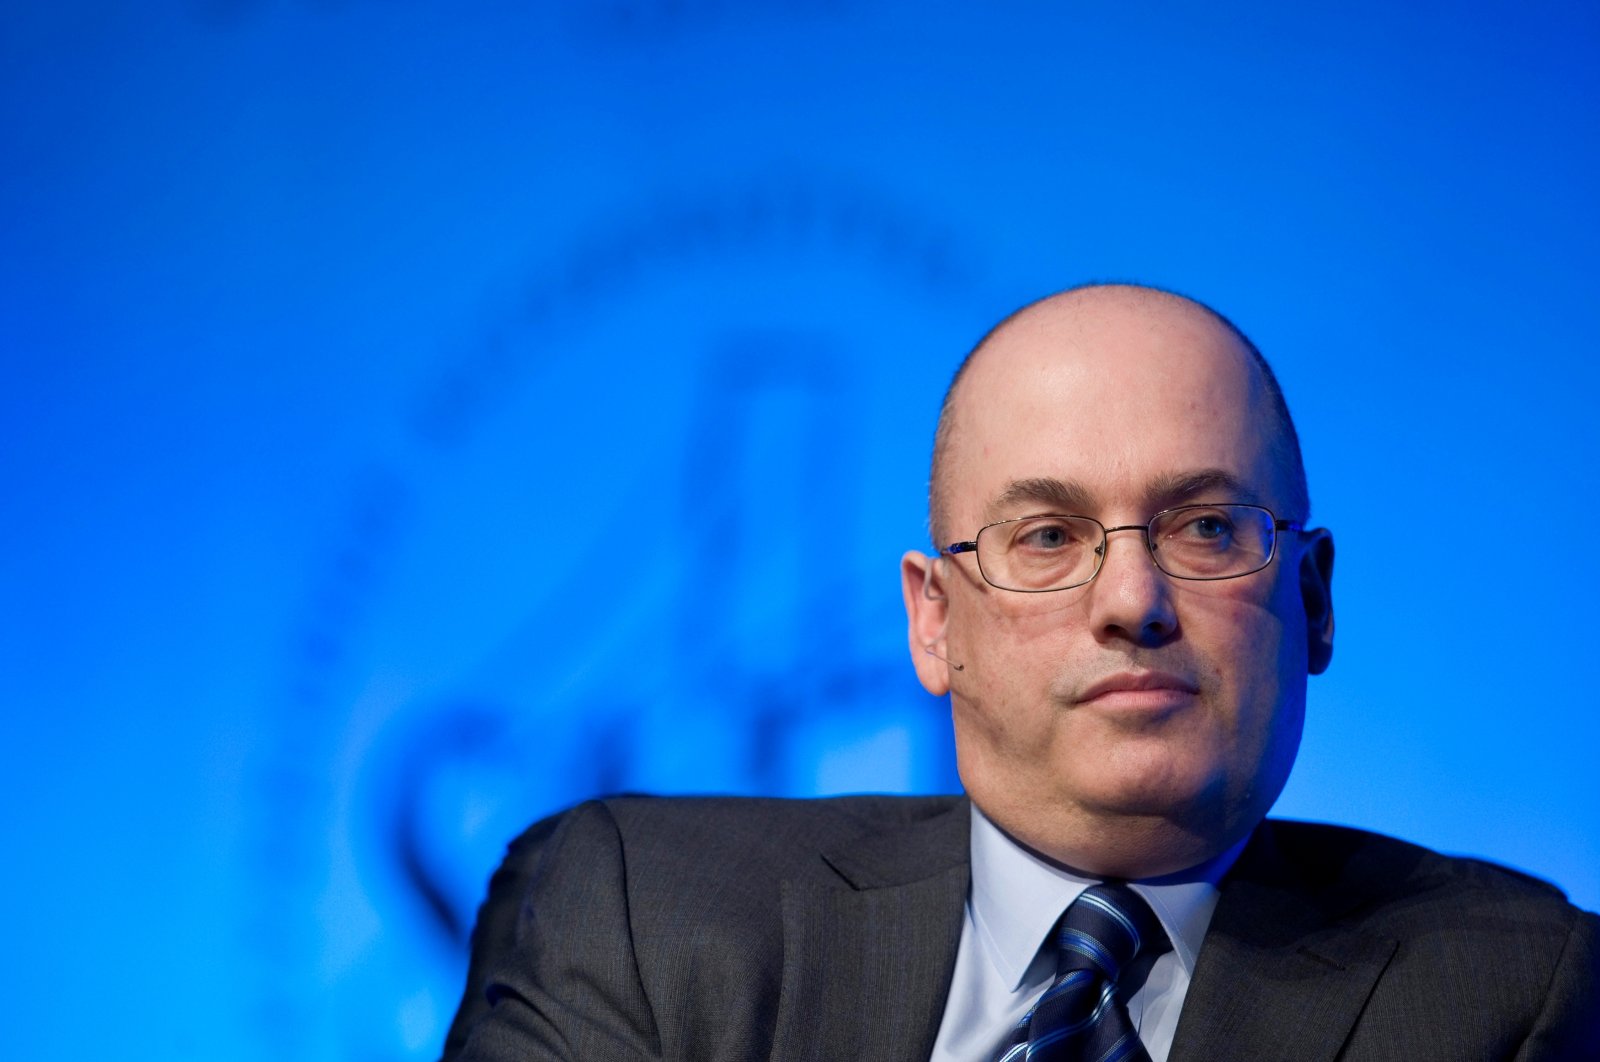 Hedge fund manager Steven Cohen, founder and chairman of SAC Capital Advisors, listens to a question during a one-on-one interview session at the SkyBridge Alternatives (SALT) Conference in Las Vegas, Nevada, May 11, 2011. (Reuters Photo)